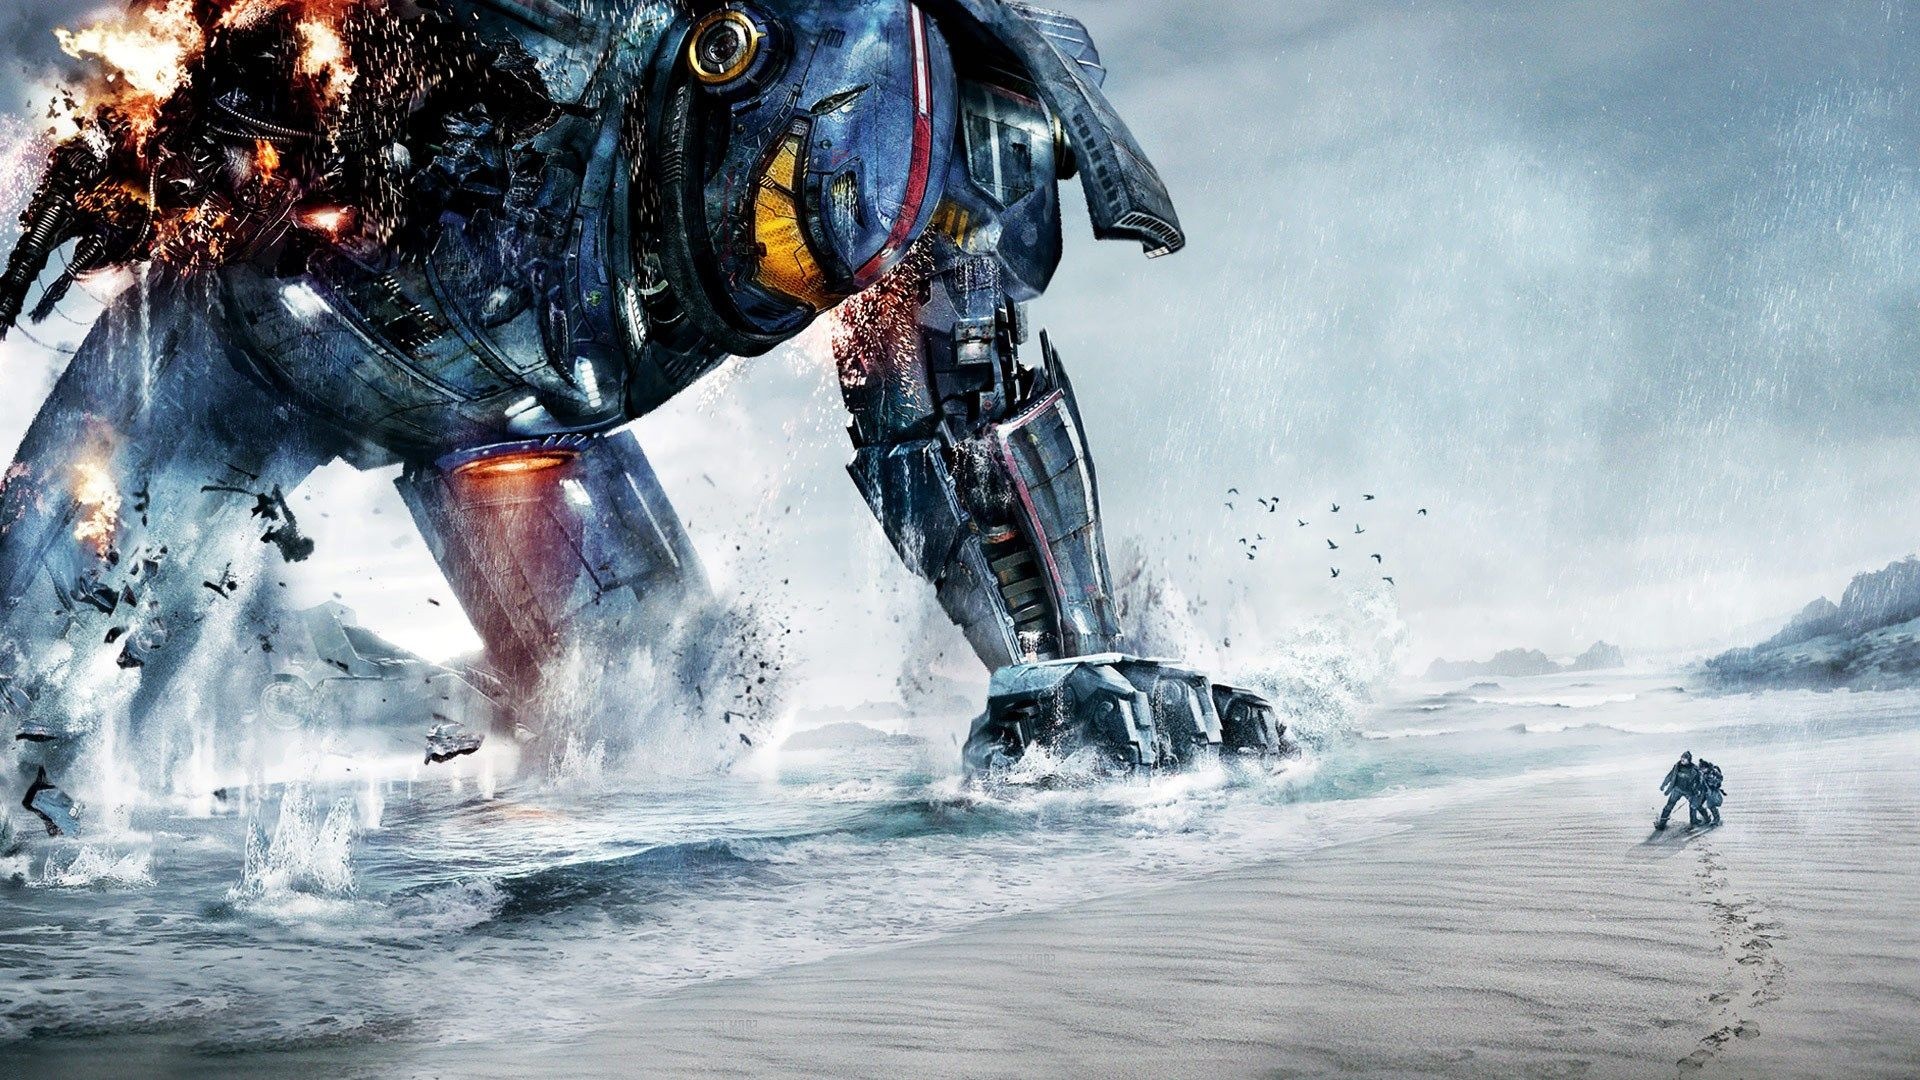 Pacific Rim, HD wallpapers pack, Wardell Birds, Movie posters, 1920x1080 Full HD Desktop